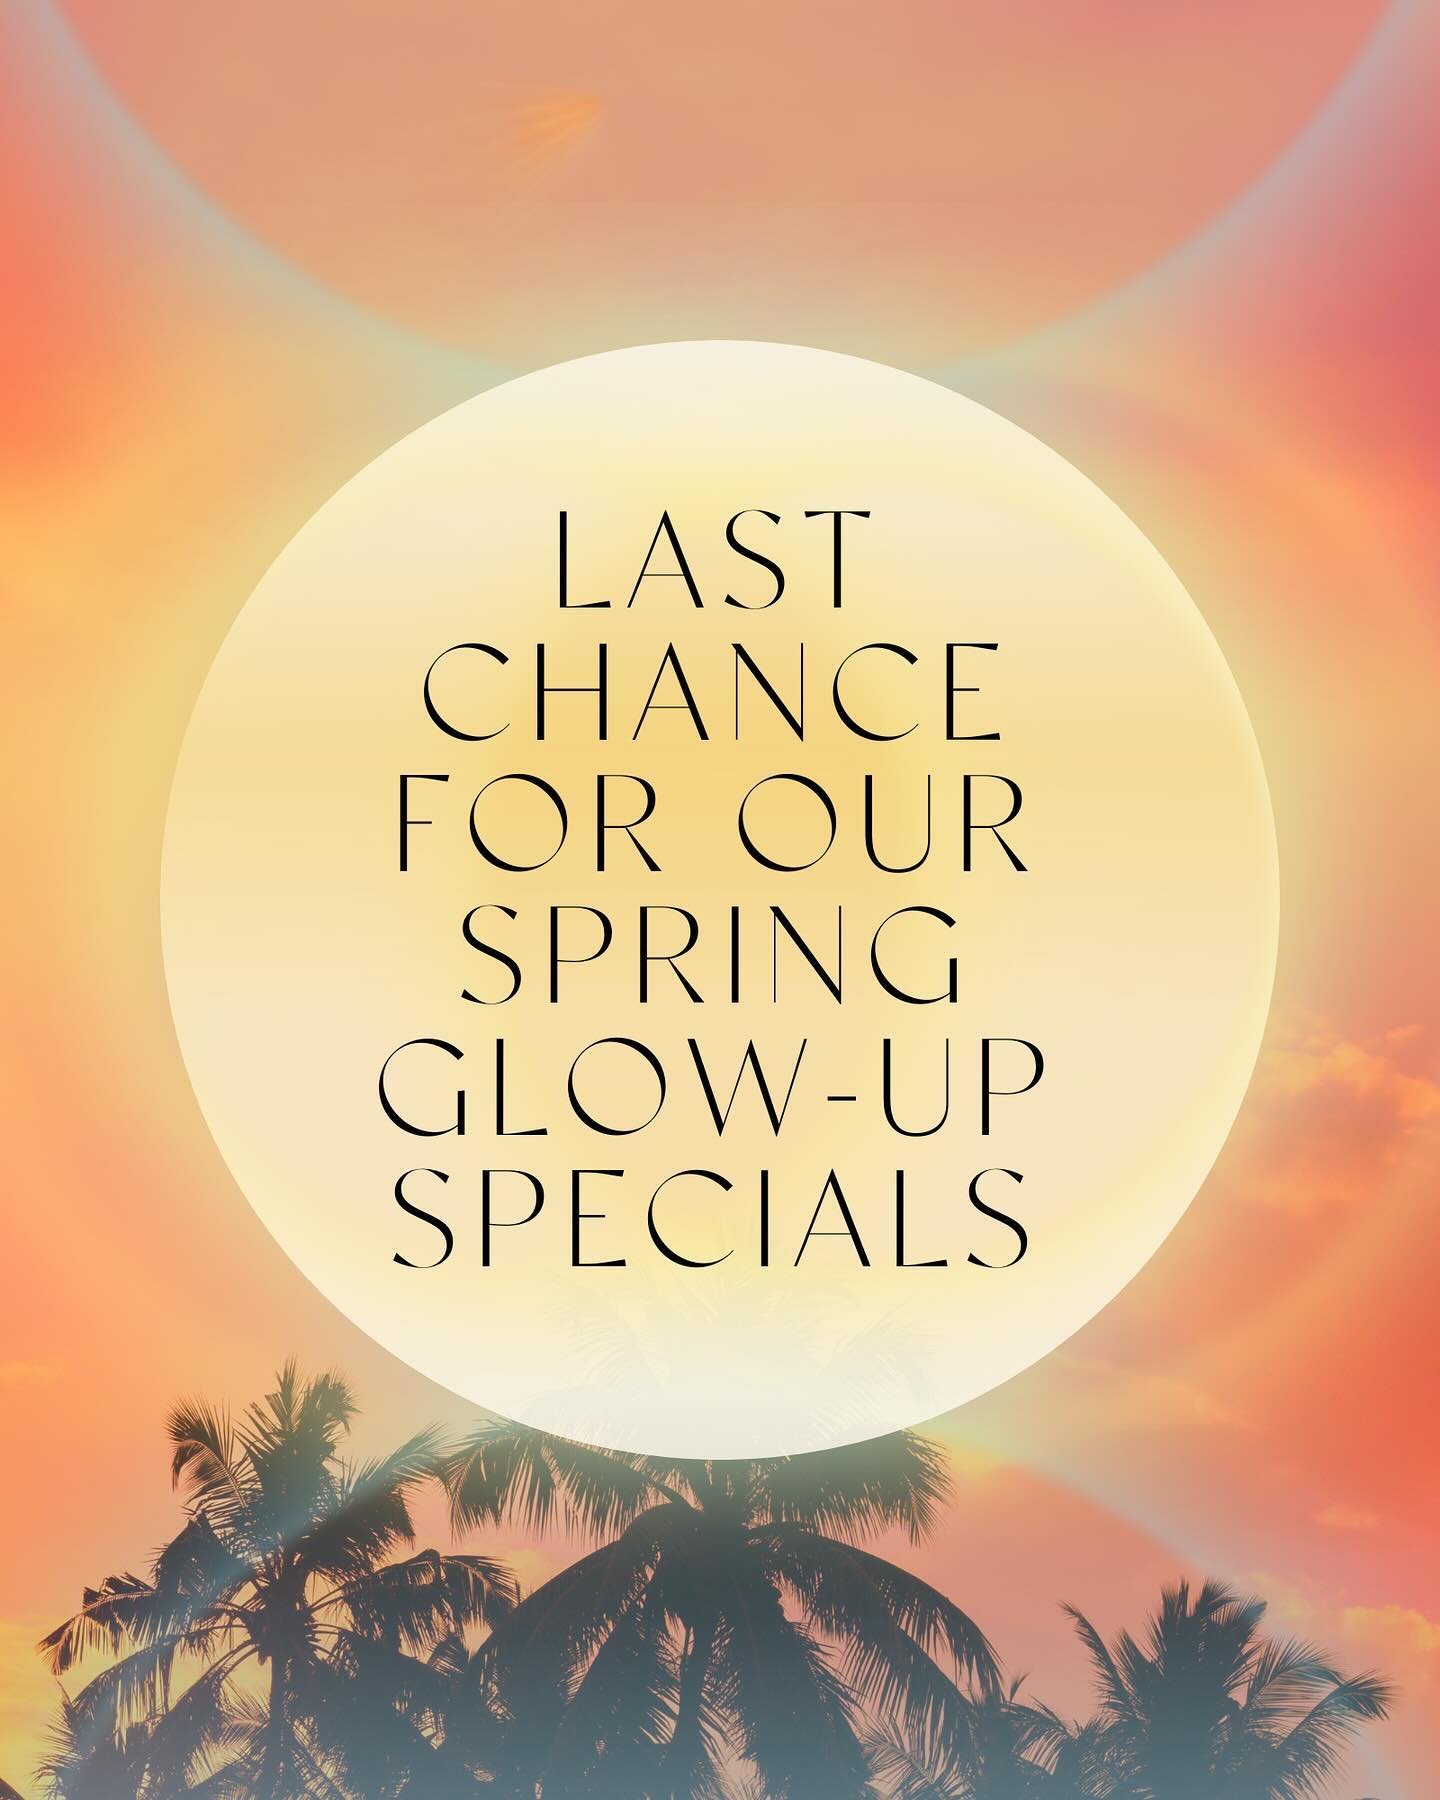 Last call for our Spring Glow-Up Specials! 🌴

Don&rsquo;t miss out on deepening your wellness, getting summer-ready + benefiting from perks including 
☀️ Year-long validity
☀️ Shareable services
☀️ HSA + FSA acceptance

Time&rsquo;s running out, so 